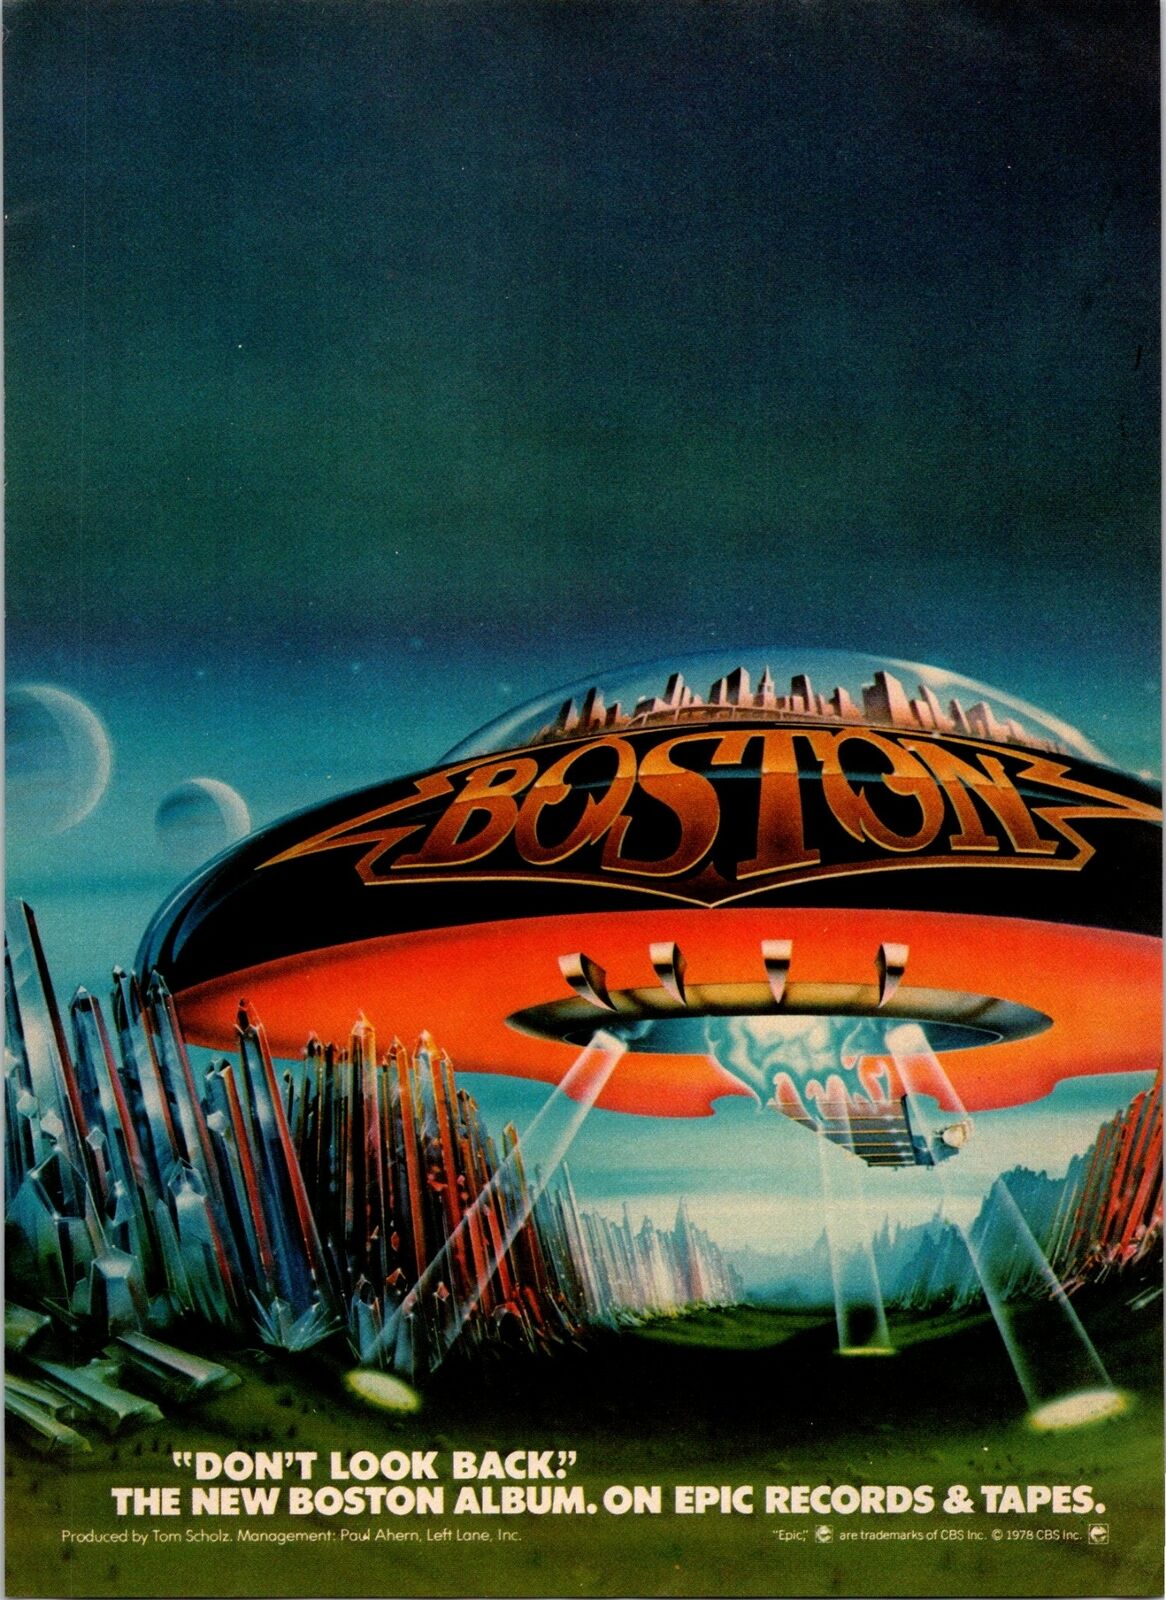 1978 Vintage 8x11 Album Promo Print Ad For Band Boston Dont Look Back Spaceship